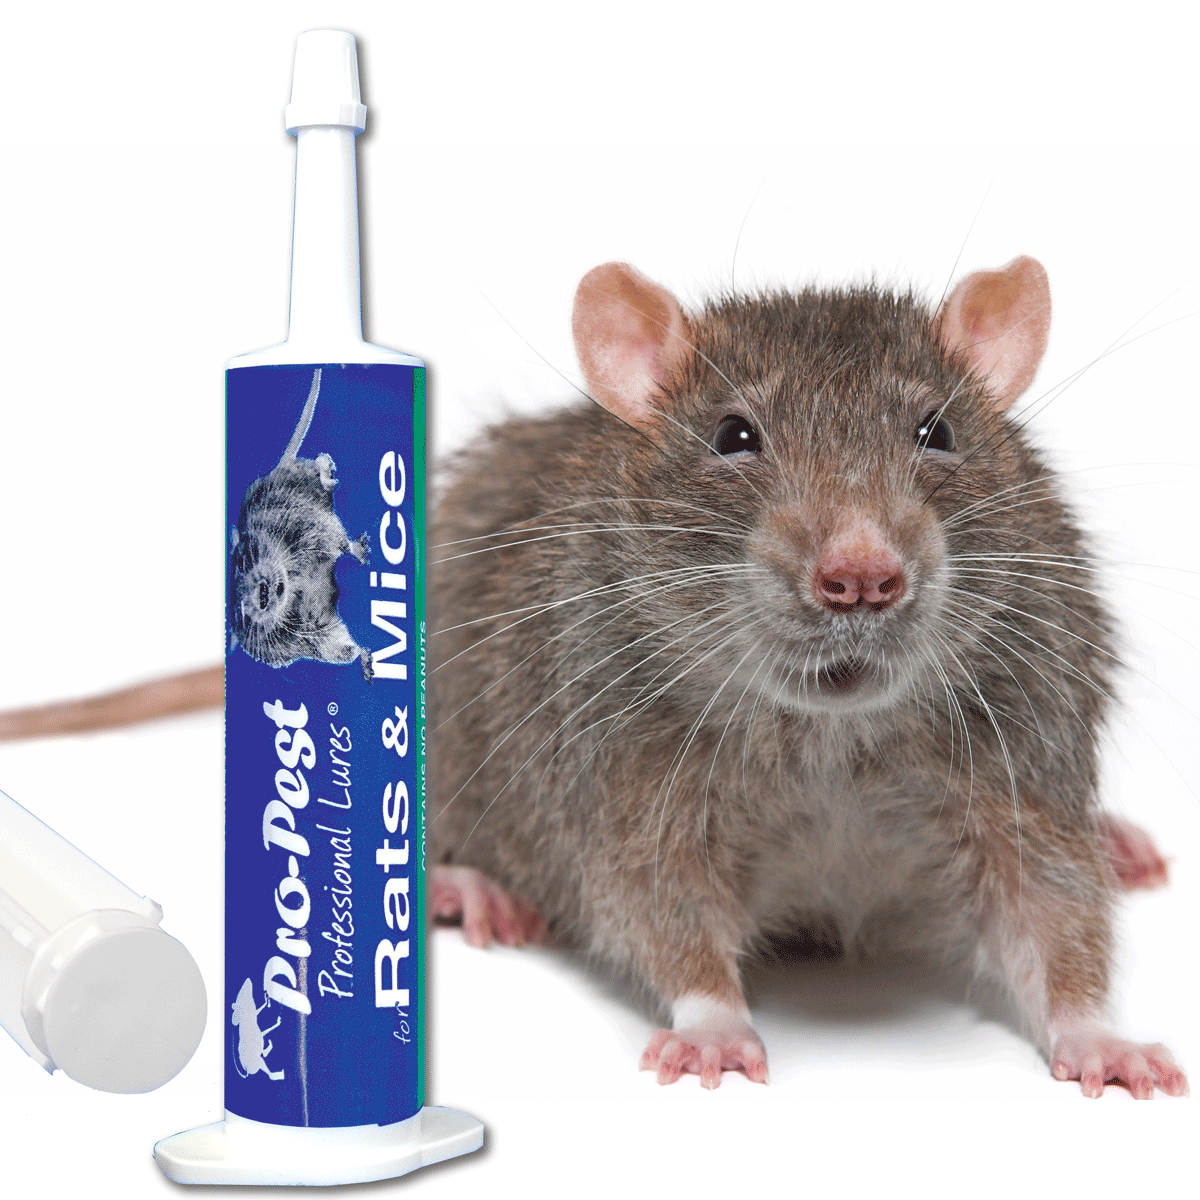 Pro-Pest Mice & Rats Lure - A Do It Yourself Pest Control Store